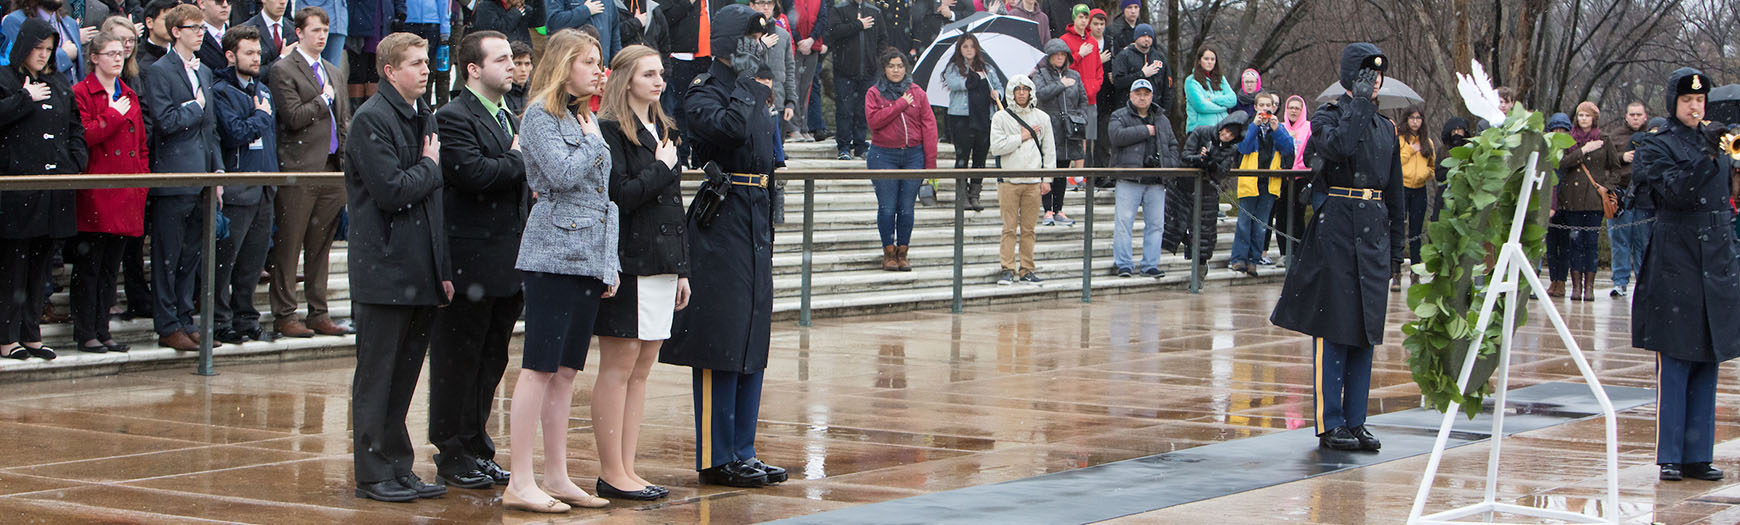 Senate Youth delegates lay a wreath at the Tomb of the Unknown Soldier, Arlington National Cemetery, Virginia